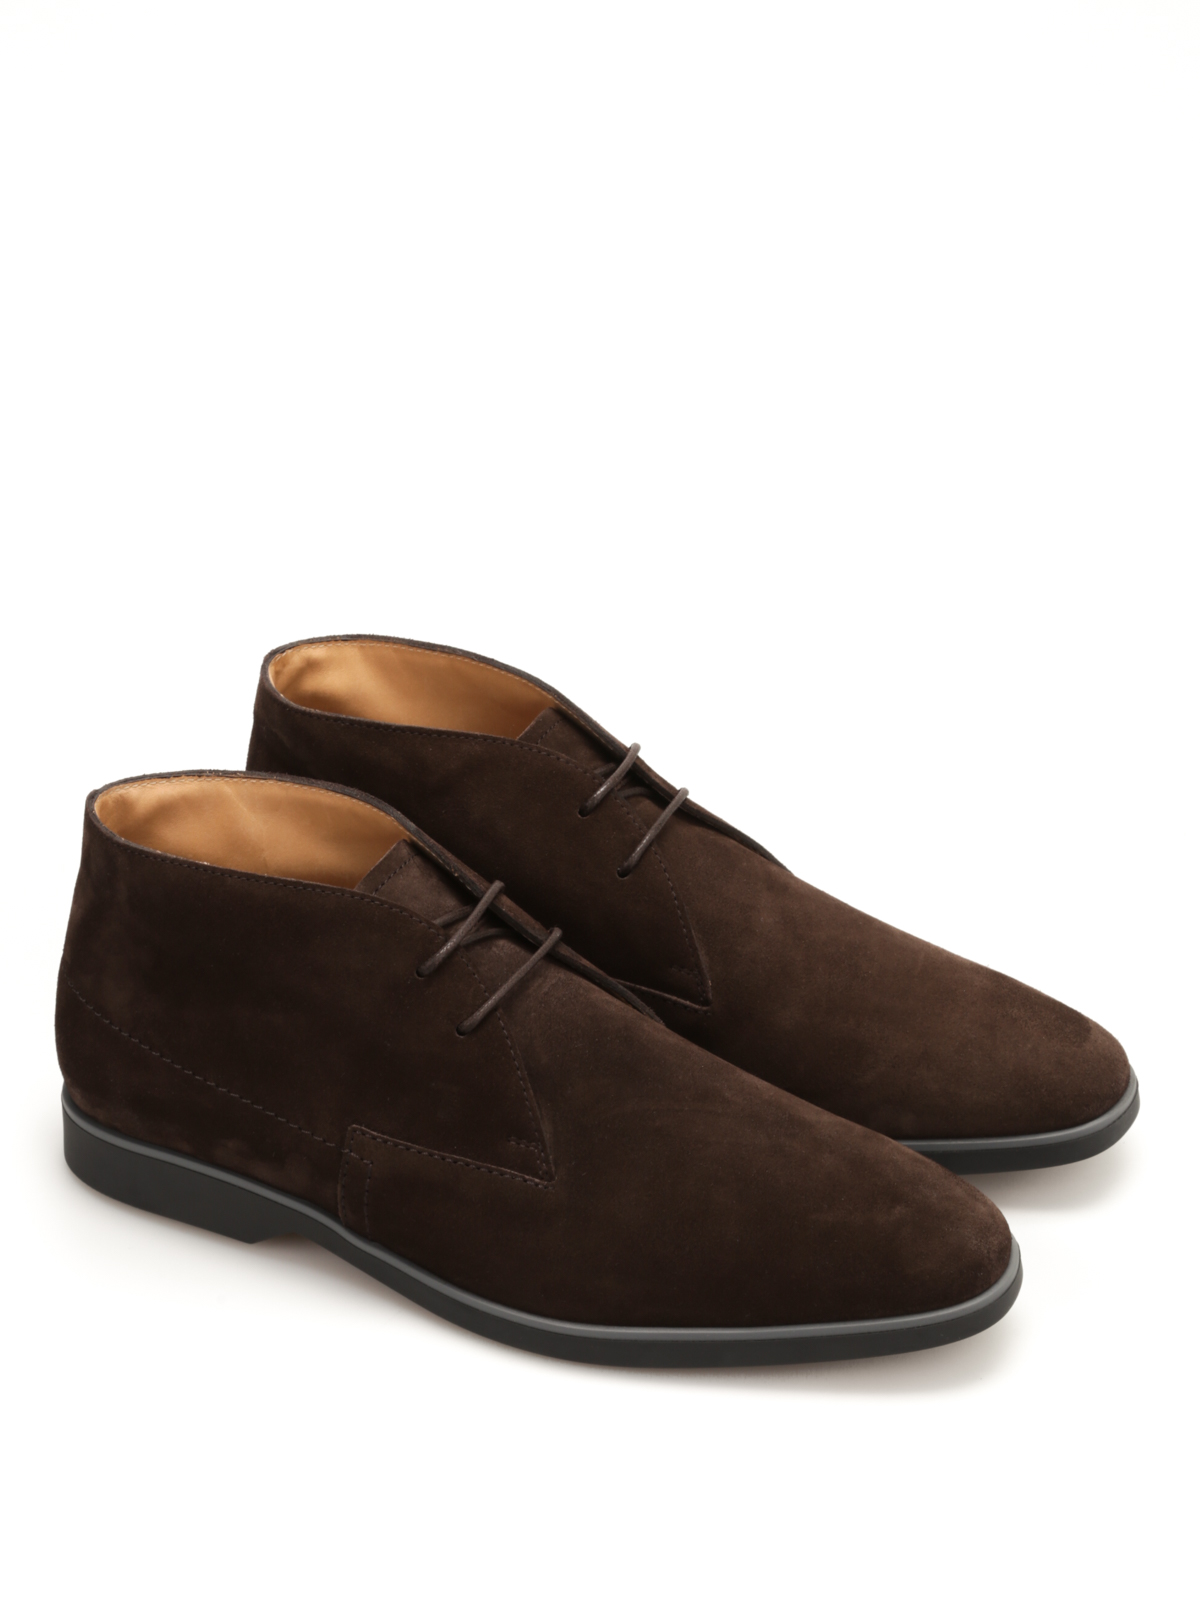 Suede desert boots - ankle boots 